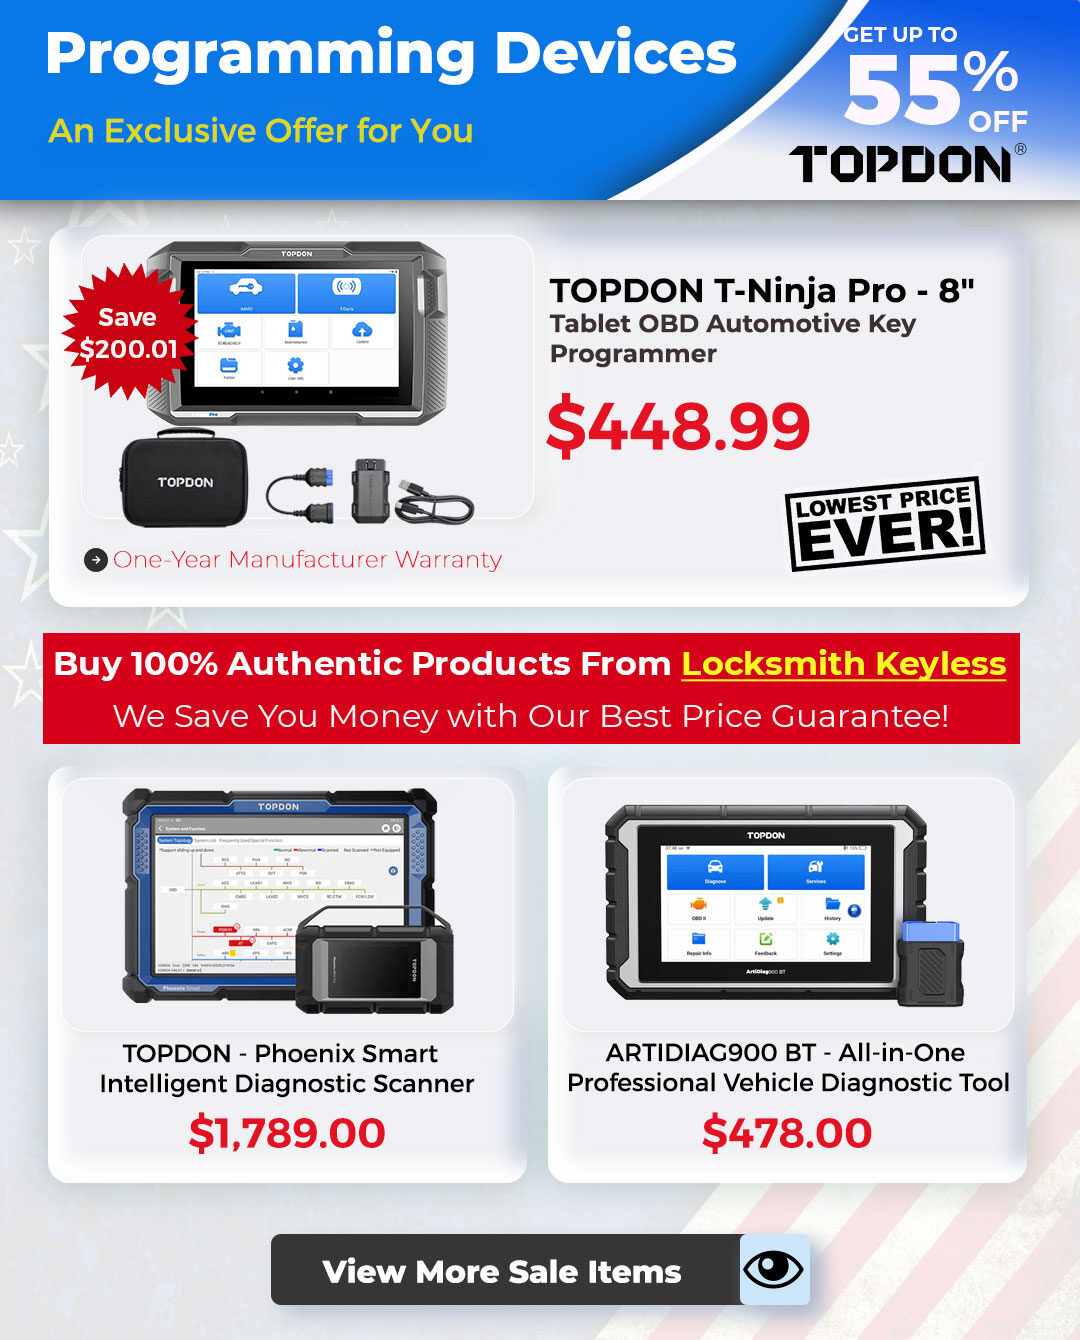 TOPDON Products